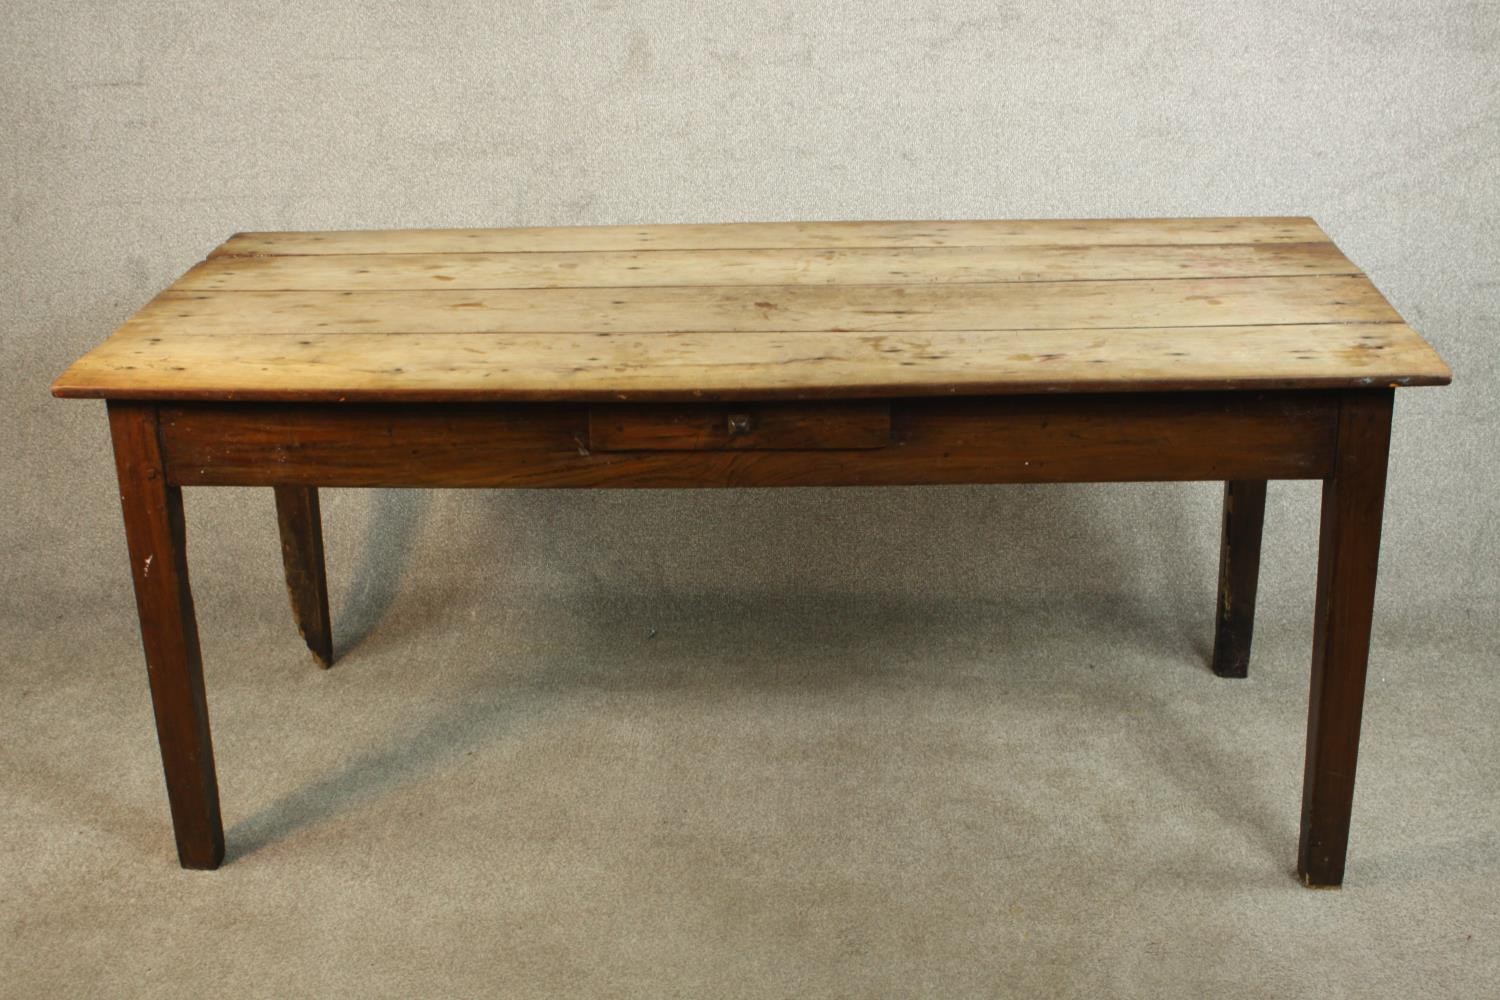 A 19th century French farmhouse table, with a plank top over a single drawer on square section